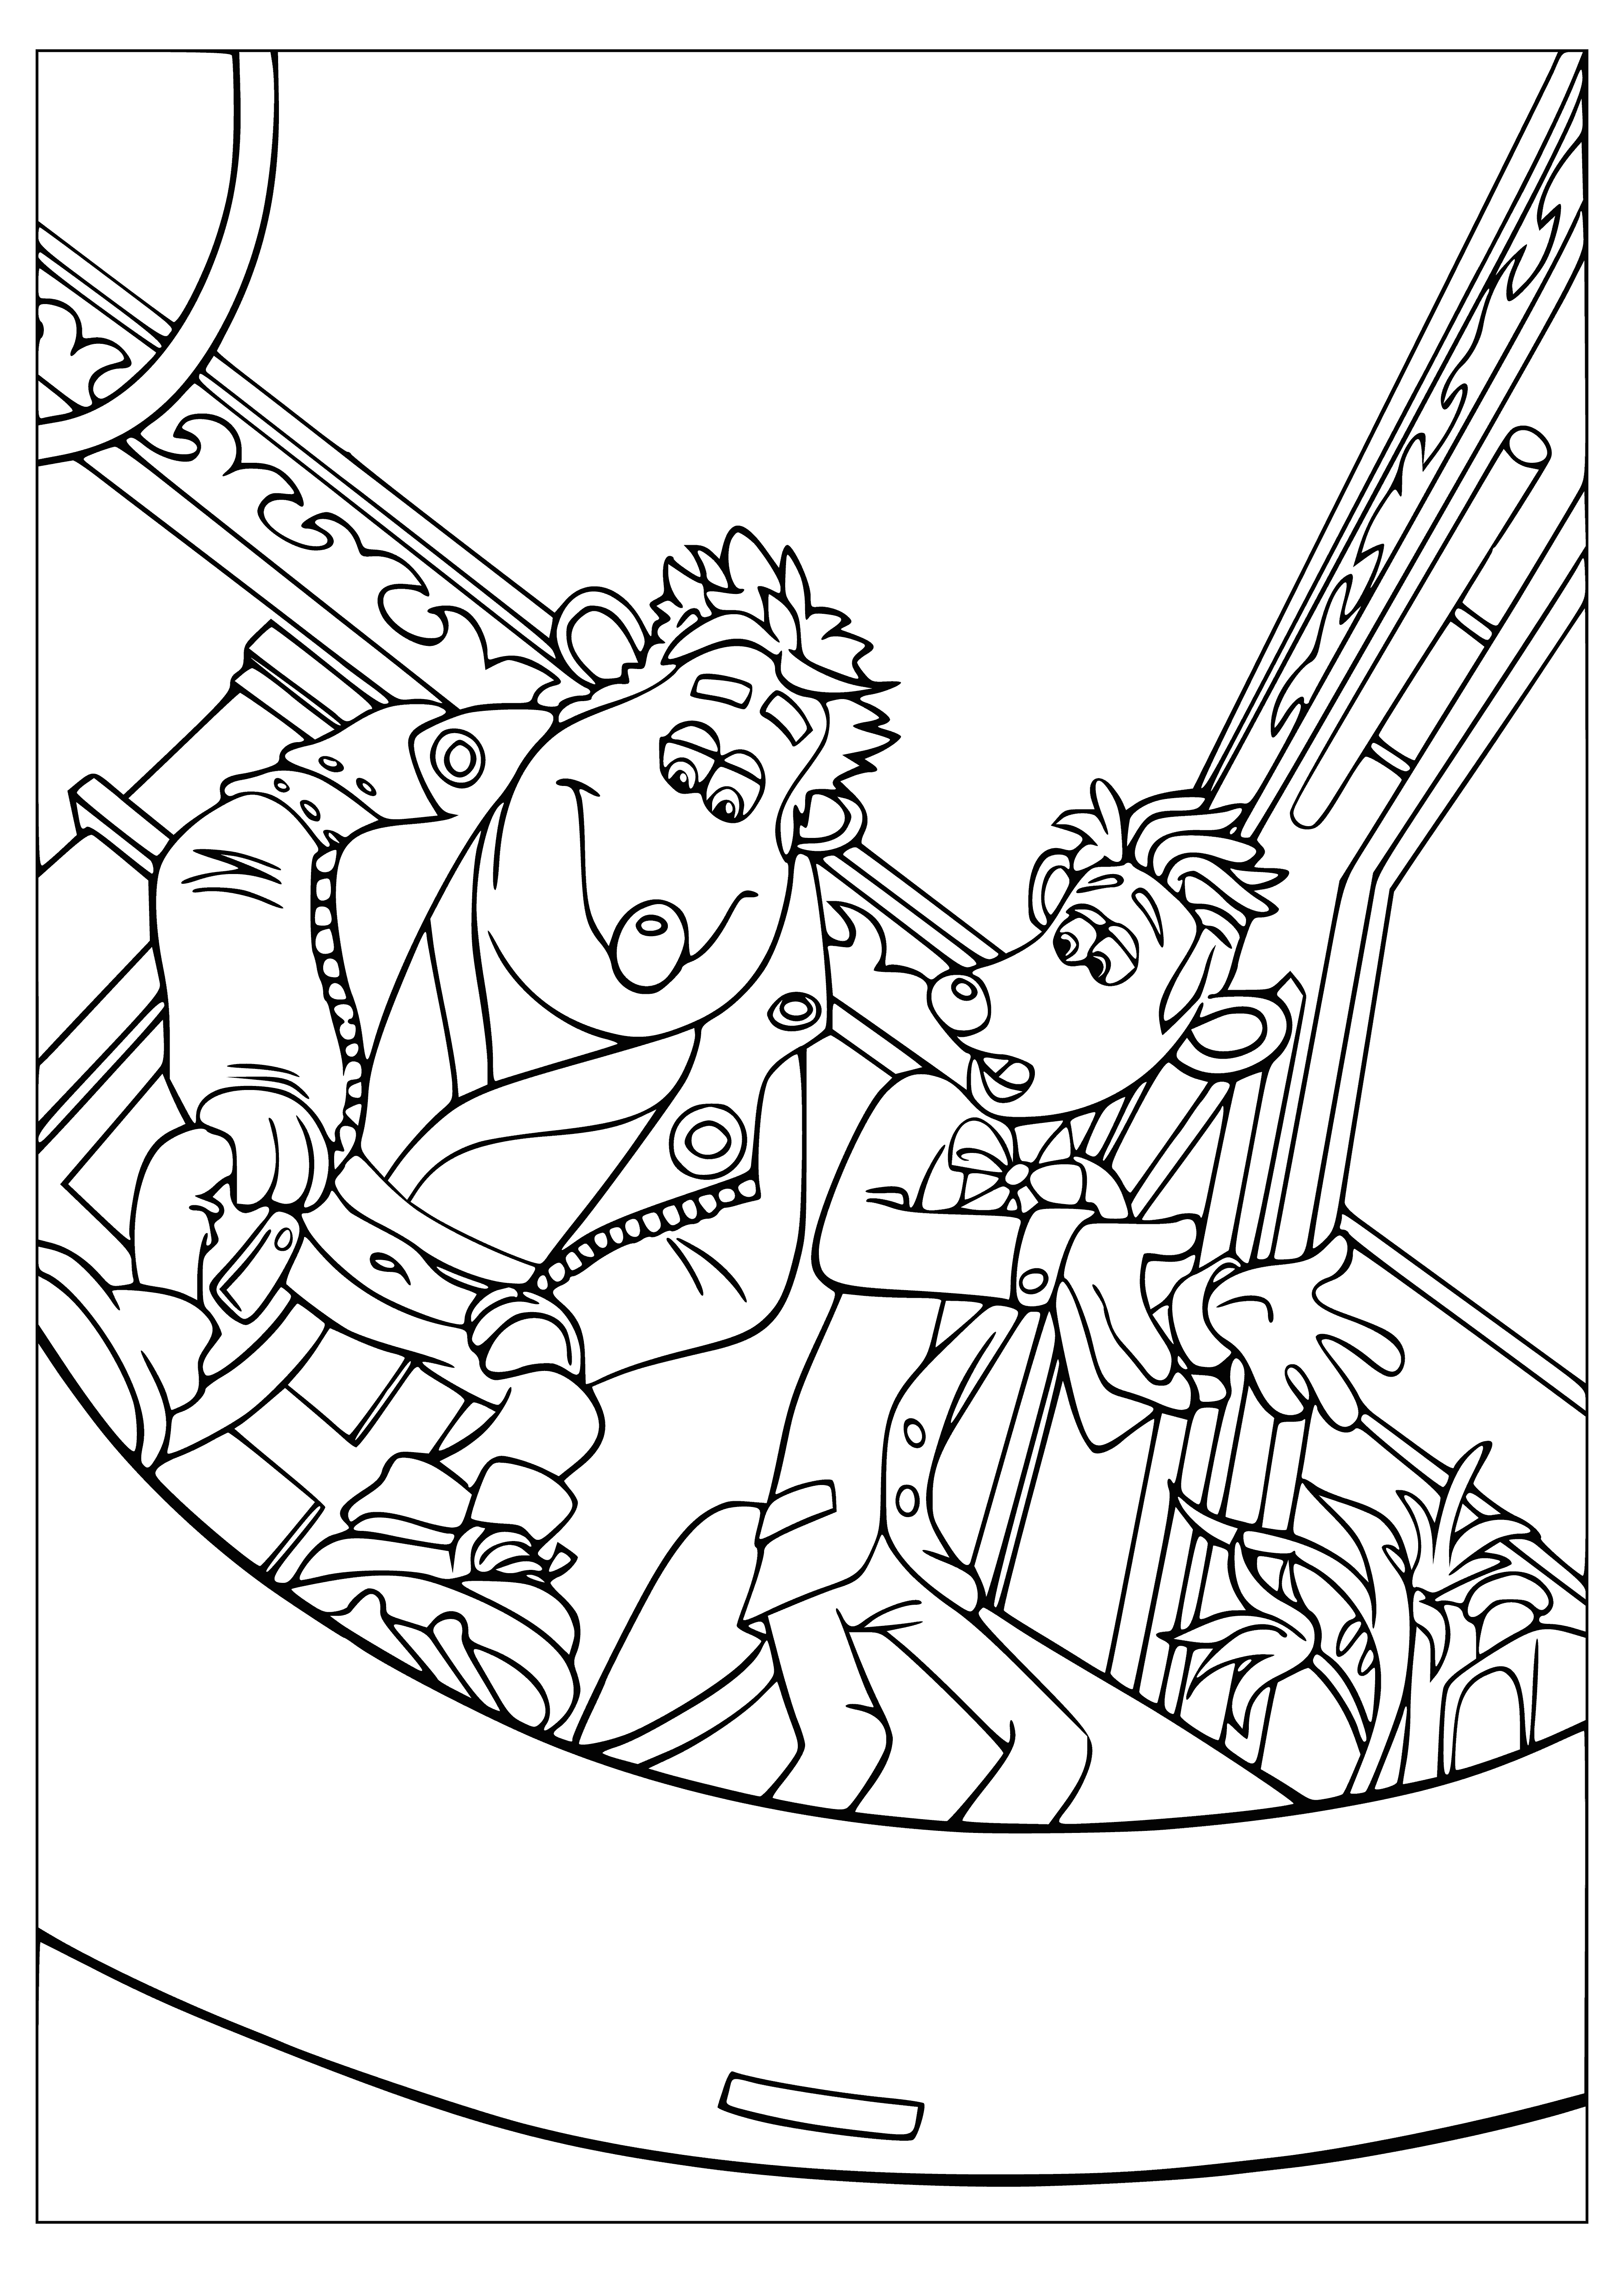 coloring page: A small, blue frog sits happily on the edge of a toilet bowl filled with green water.